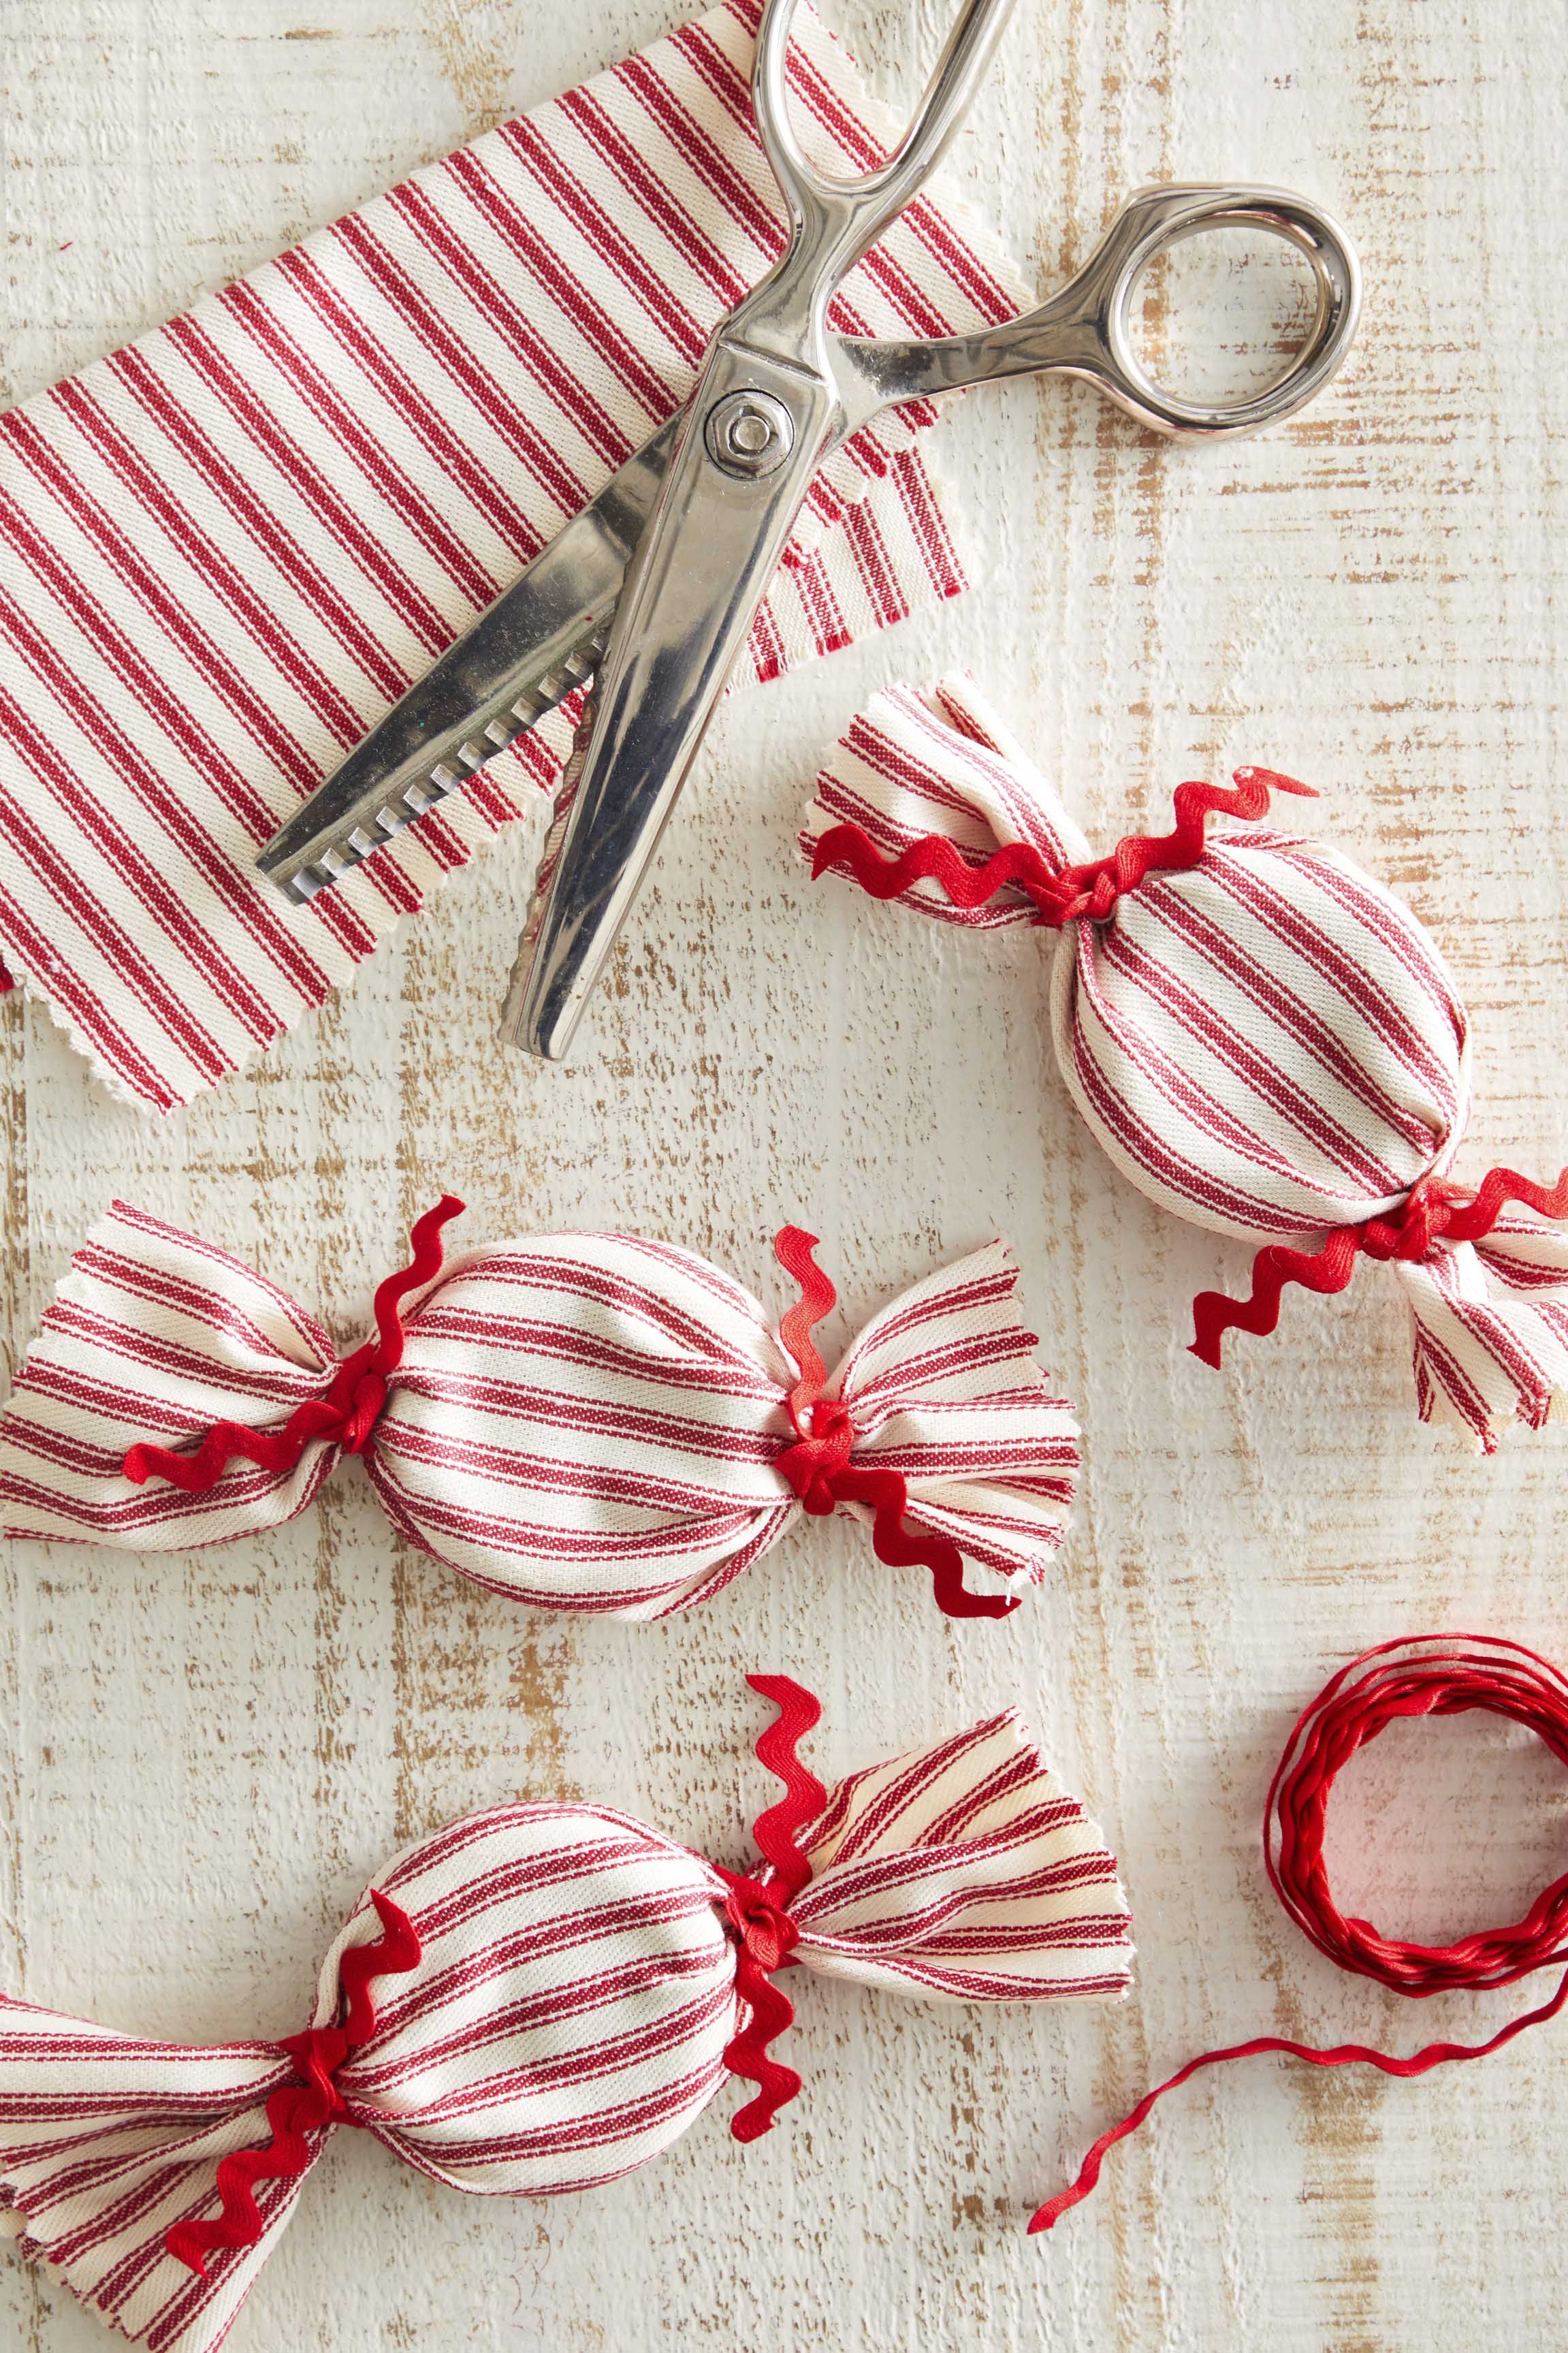 10 DIY Gift Ideas To Save You Money